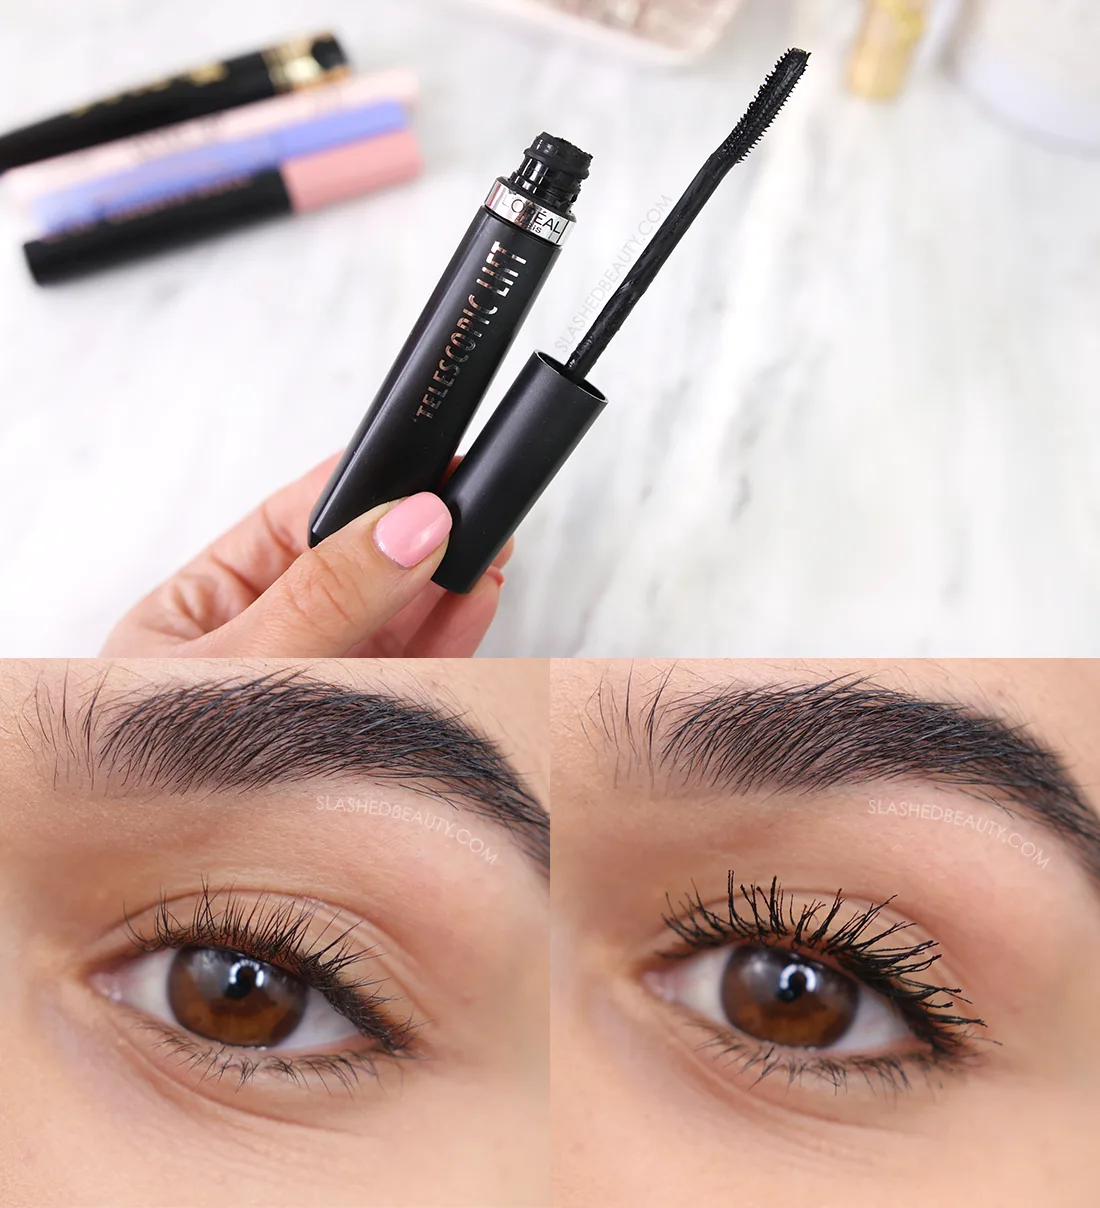 Open tube of L'Oreal Telescopic Lift mascara with close up before & after | The 5 Best Drugstore Mascaras for Short Lashes in 2023 | Slashed Beauty